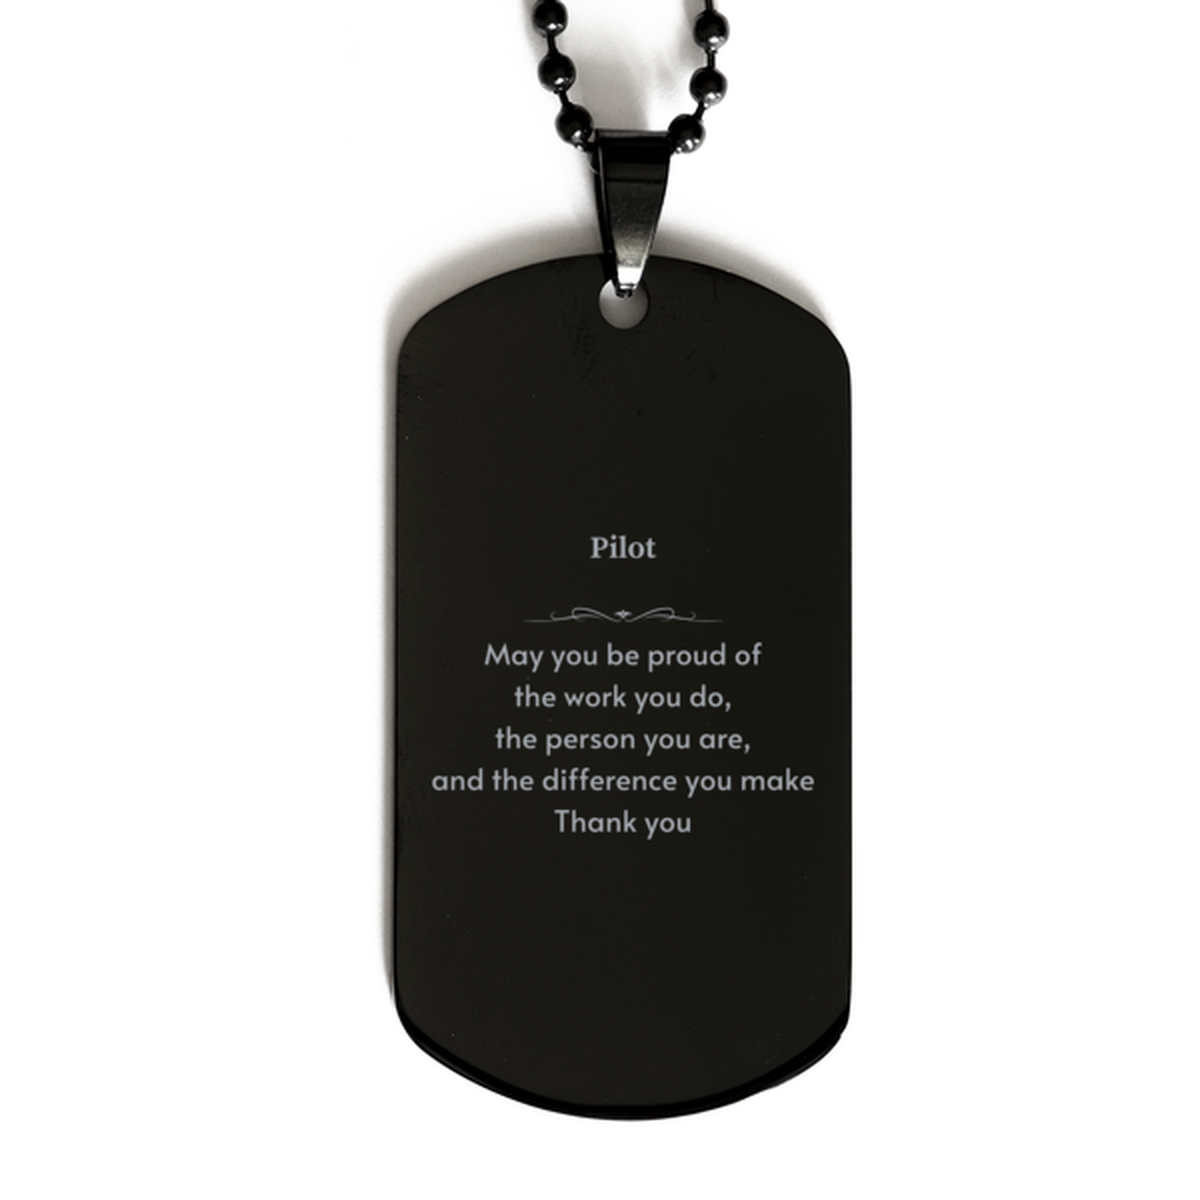 Heartwarming Black Dog Tag Retirement Coworkers Gifts for Pilot, Pilot May You be proud of the work you do, the person you are Gifts for Boss Men Women Friends